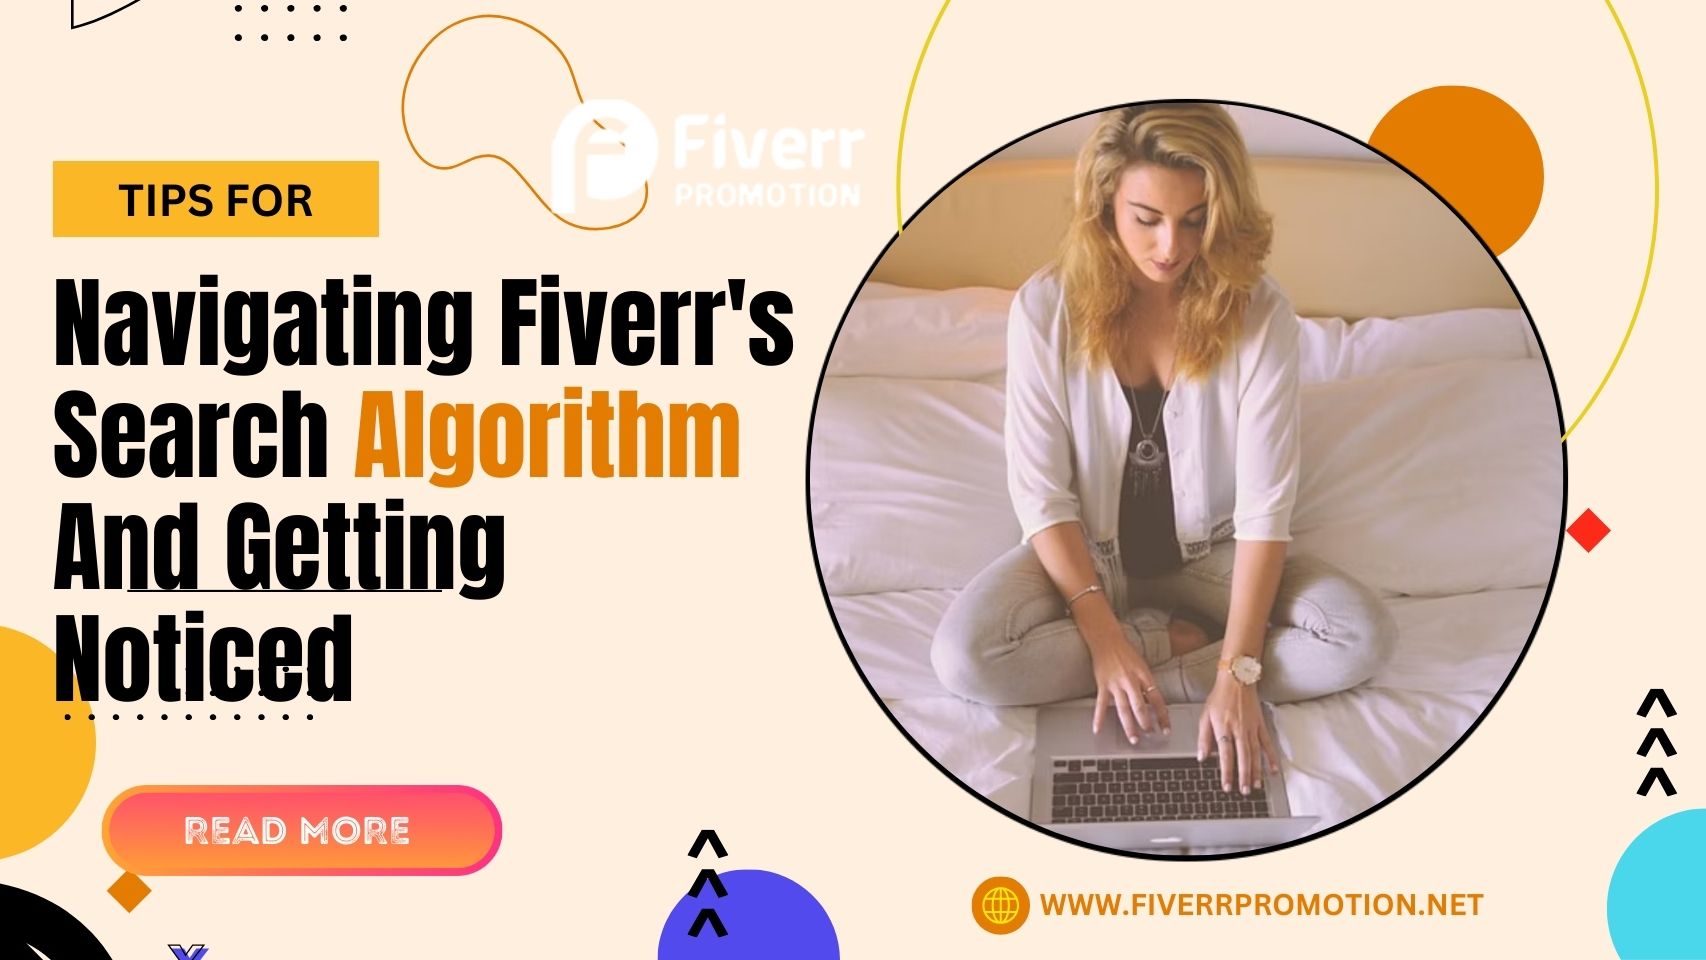 Tips for Navigating Fiverr’s Search Algorithm and Getting Noticed